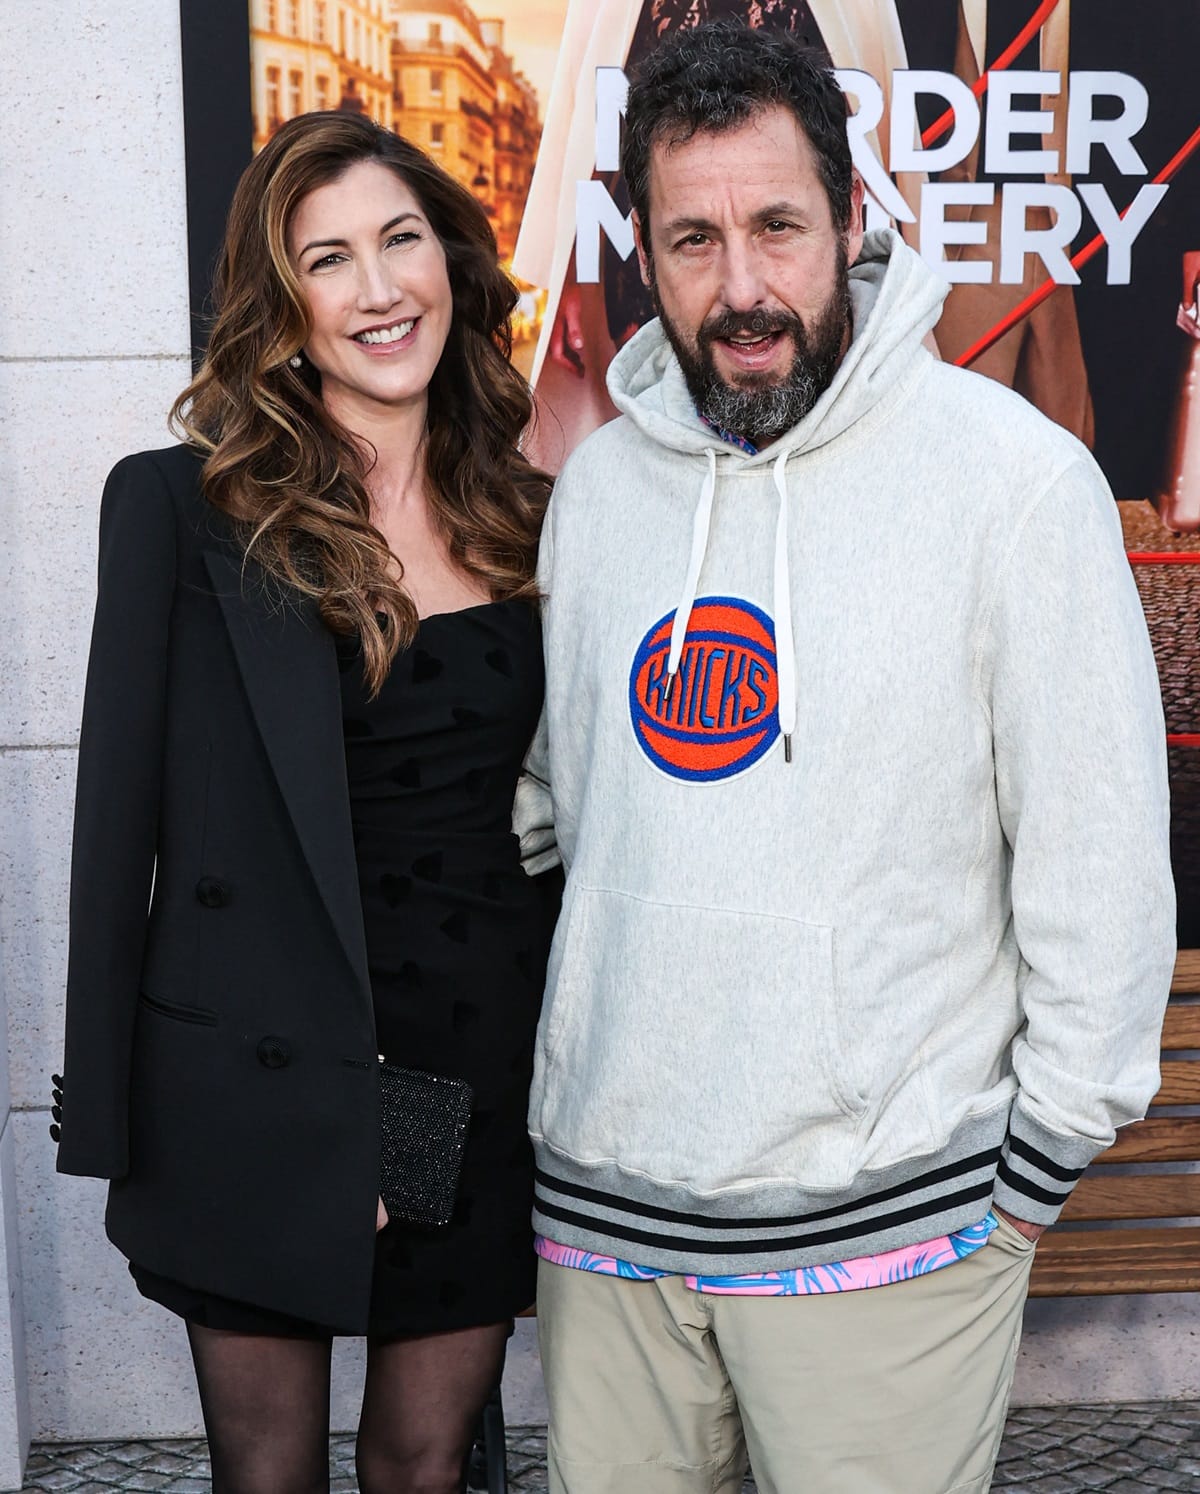 Jackie Sandler, who is 5'9" (1.75 m) tall, posed with her slightly taller husband Adam Sandler, who is 5'9 ¾" (177.2 cm) tall, at the Los Angeles Premiere Of Netflix's "Murder Mystery 2"